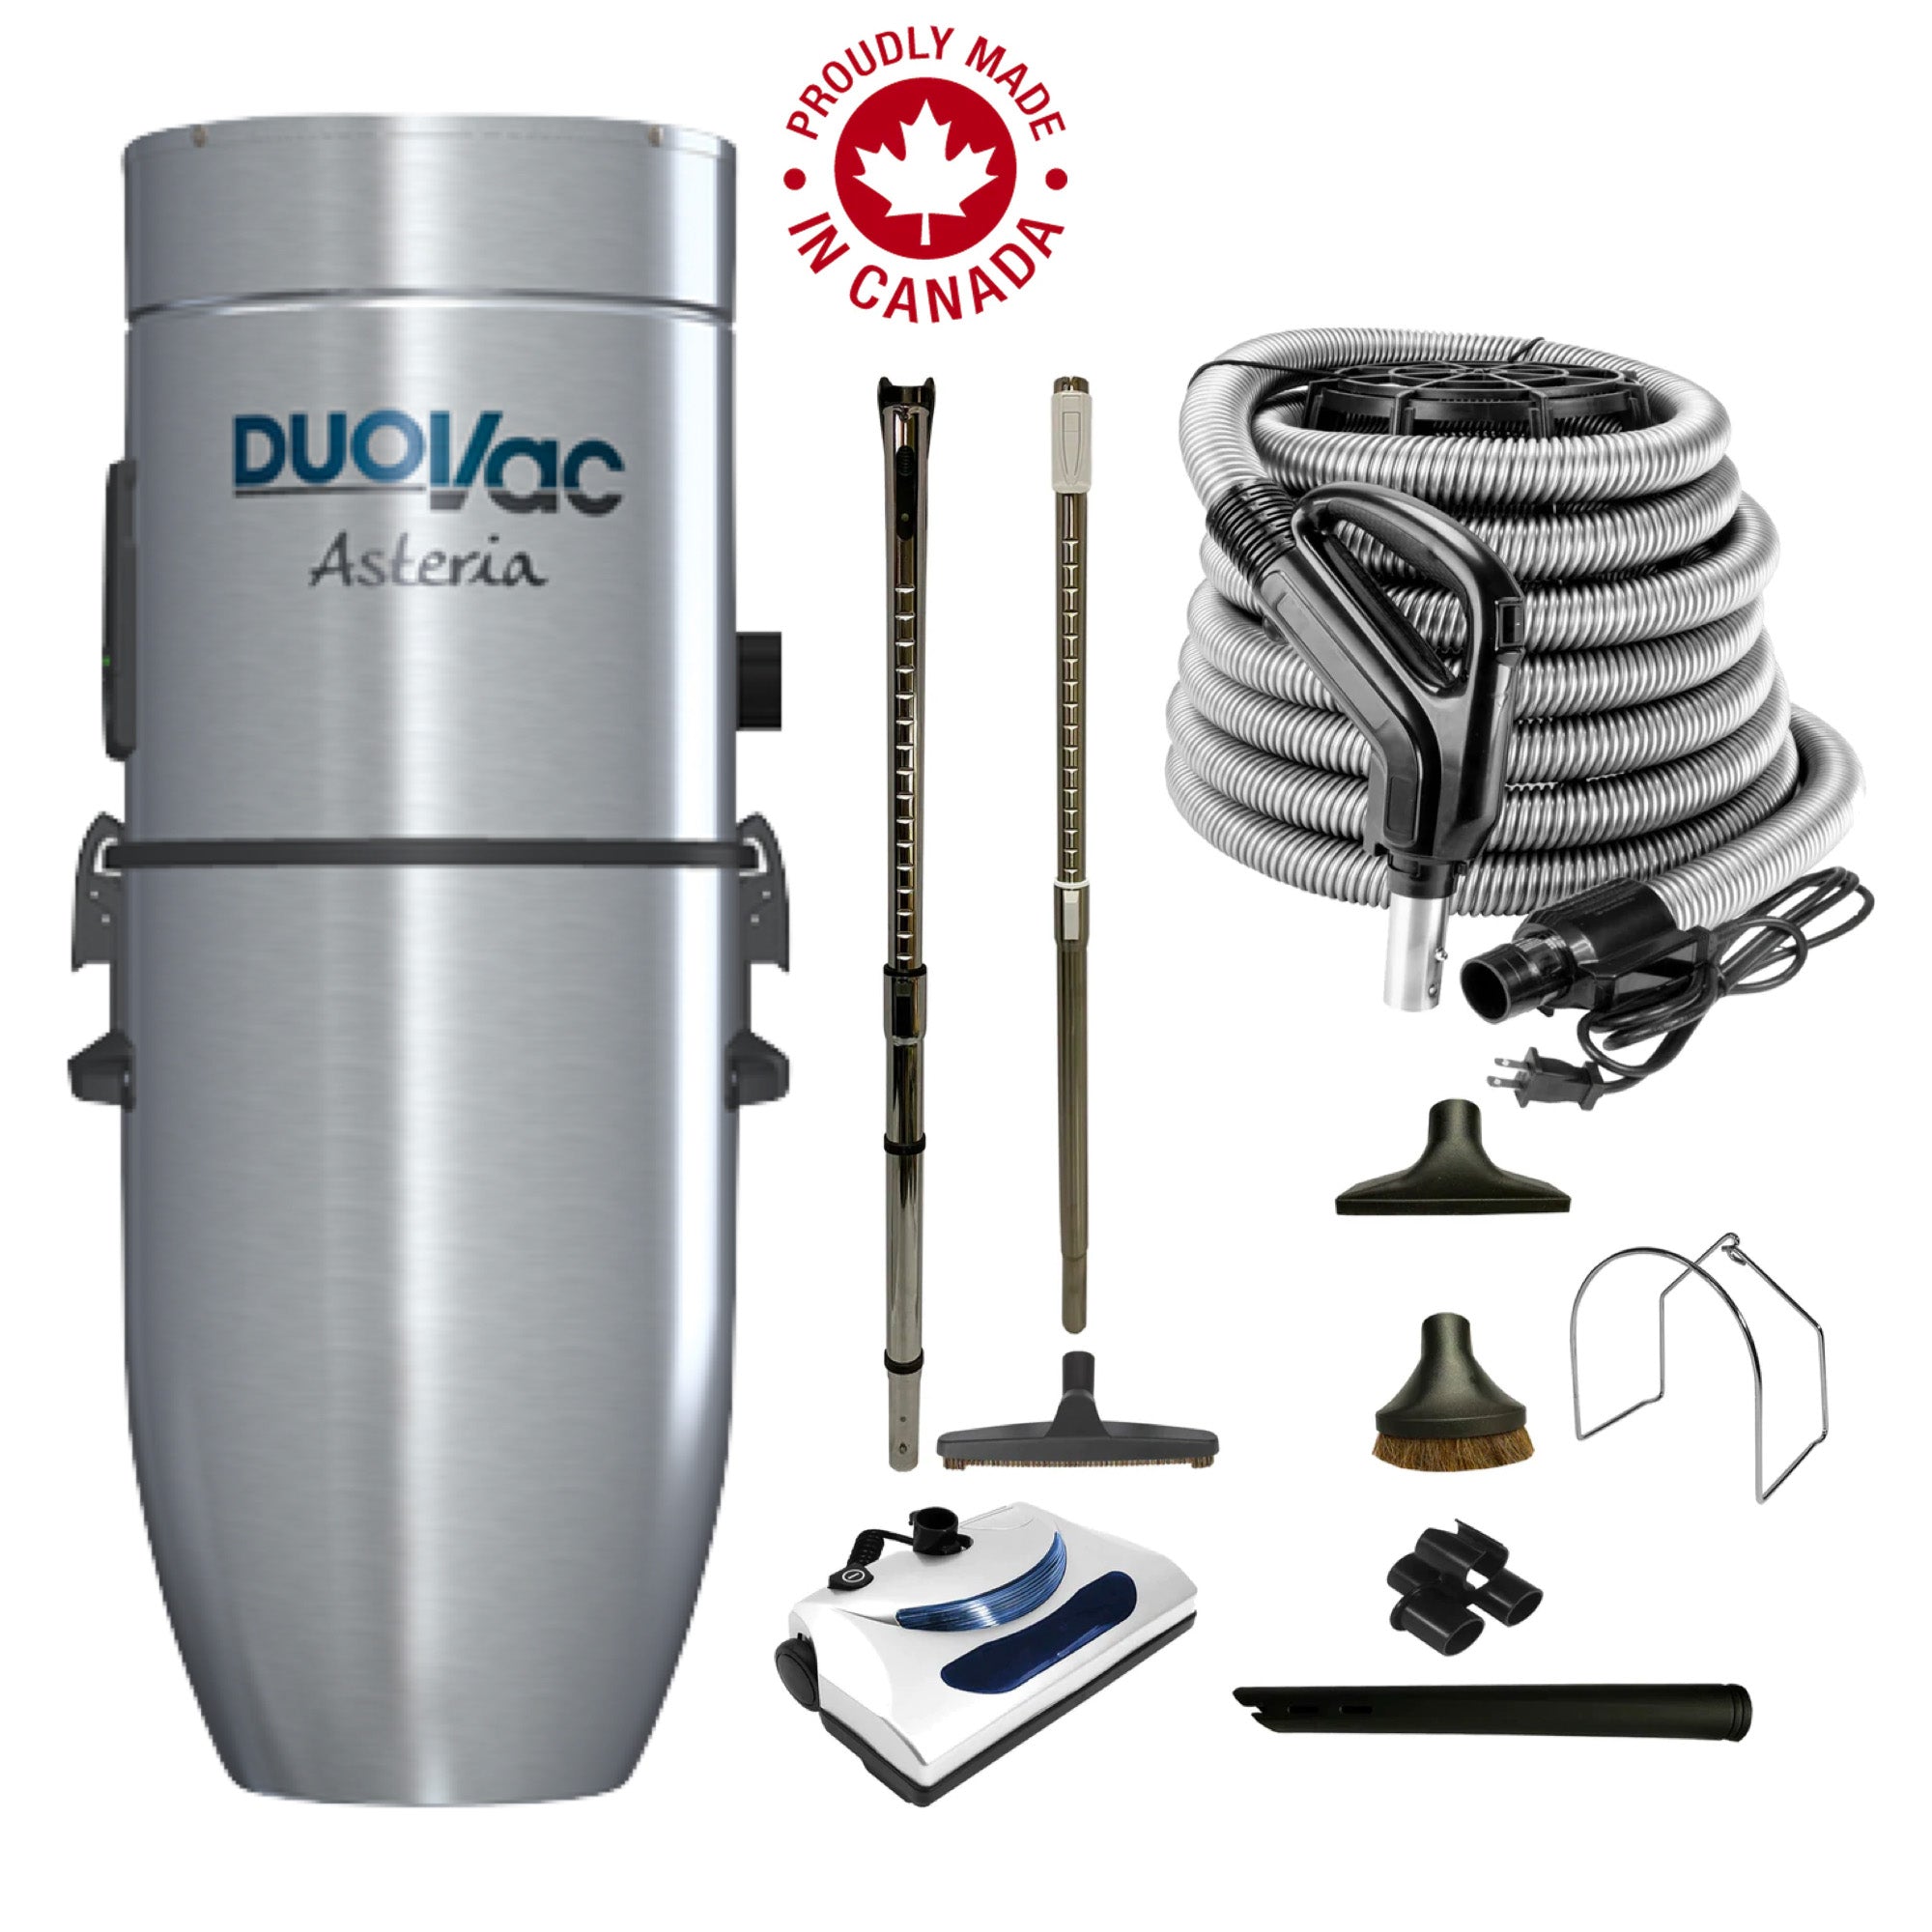 DuoVac Asteria Central Vacuum with Basic Electric Package